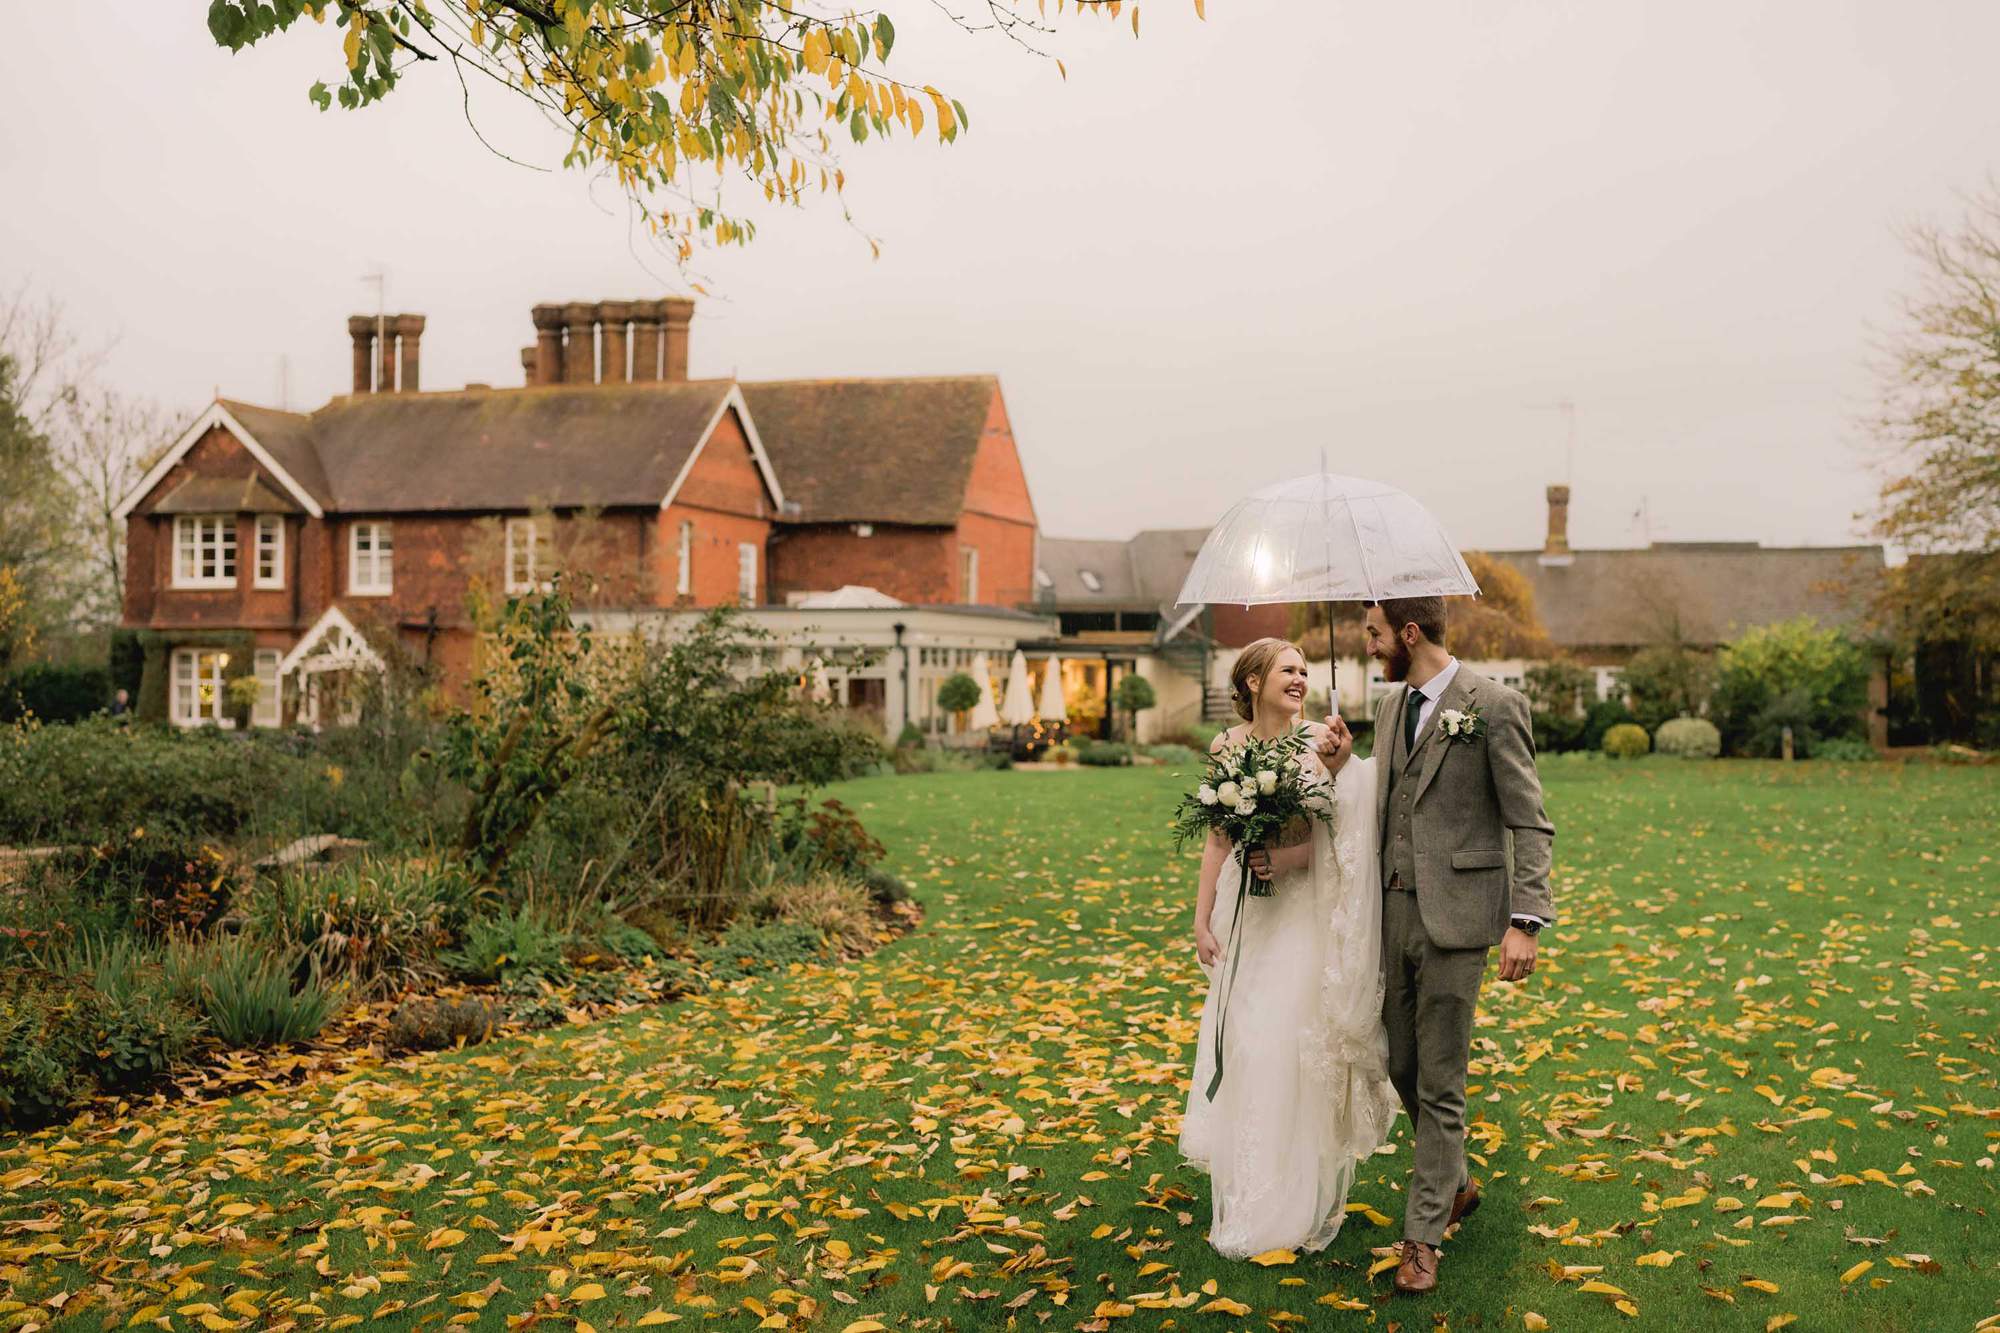 Bride and groom take a stroll under a clear umbrella at The Farmhouse at Redcoats in Hitchin.